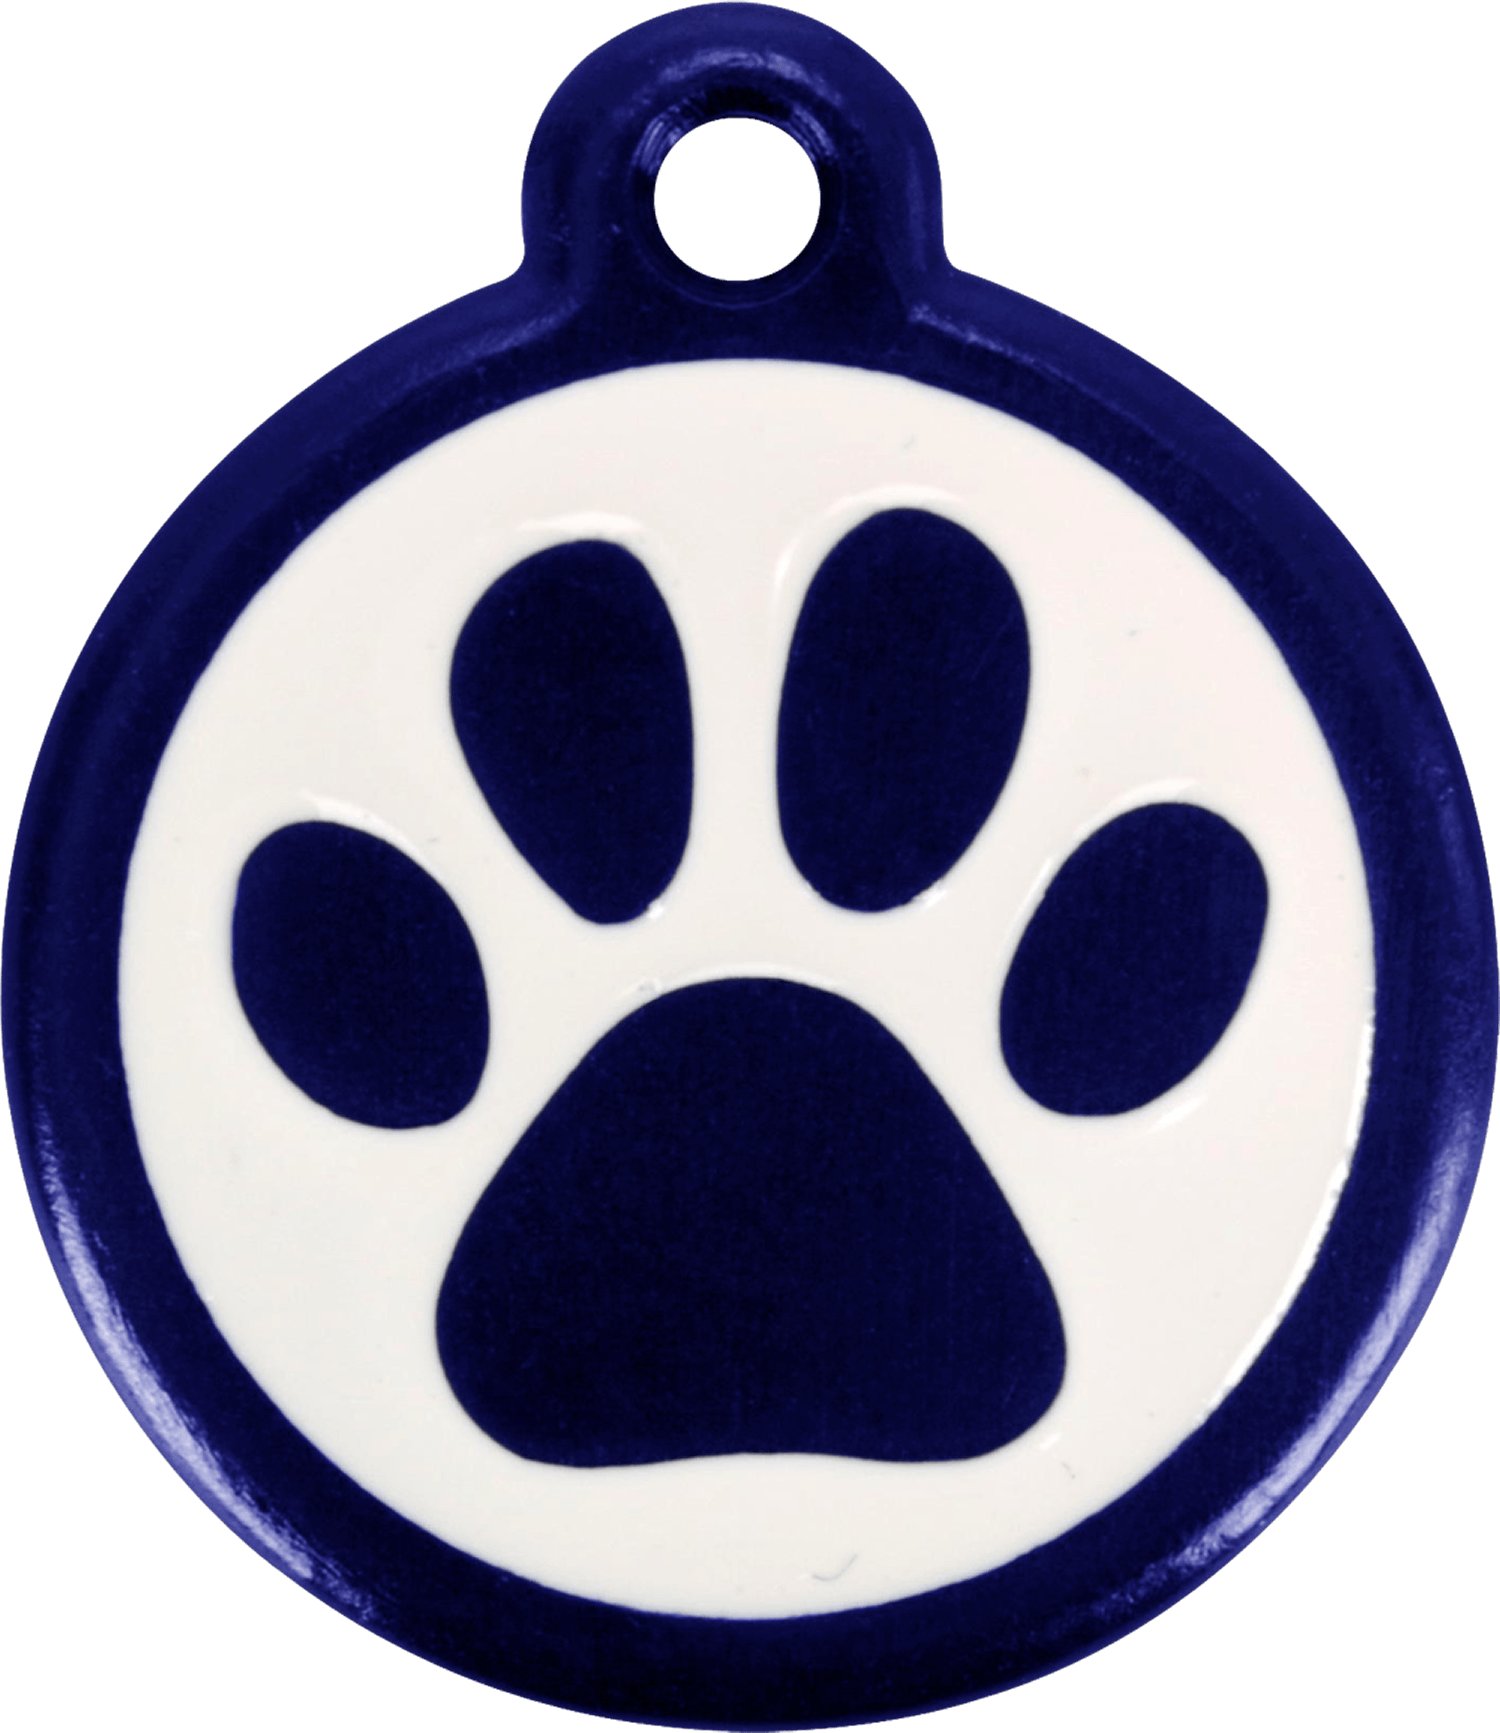 Du Blue Paw Logo - Cat paw banner free navy blue - RR collections